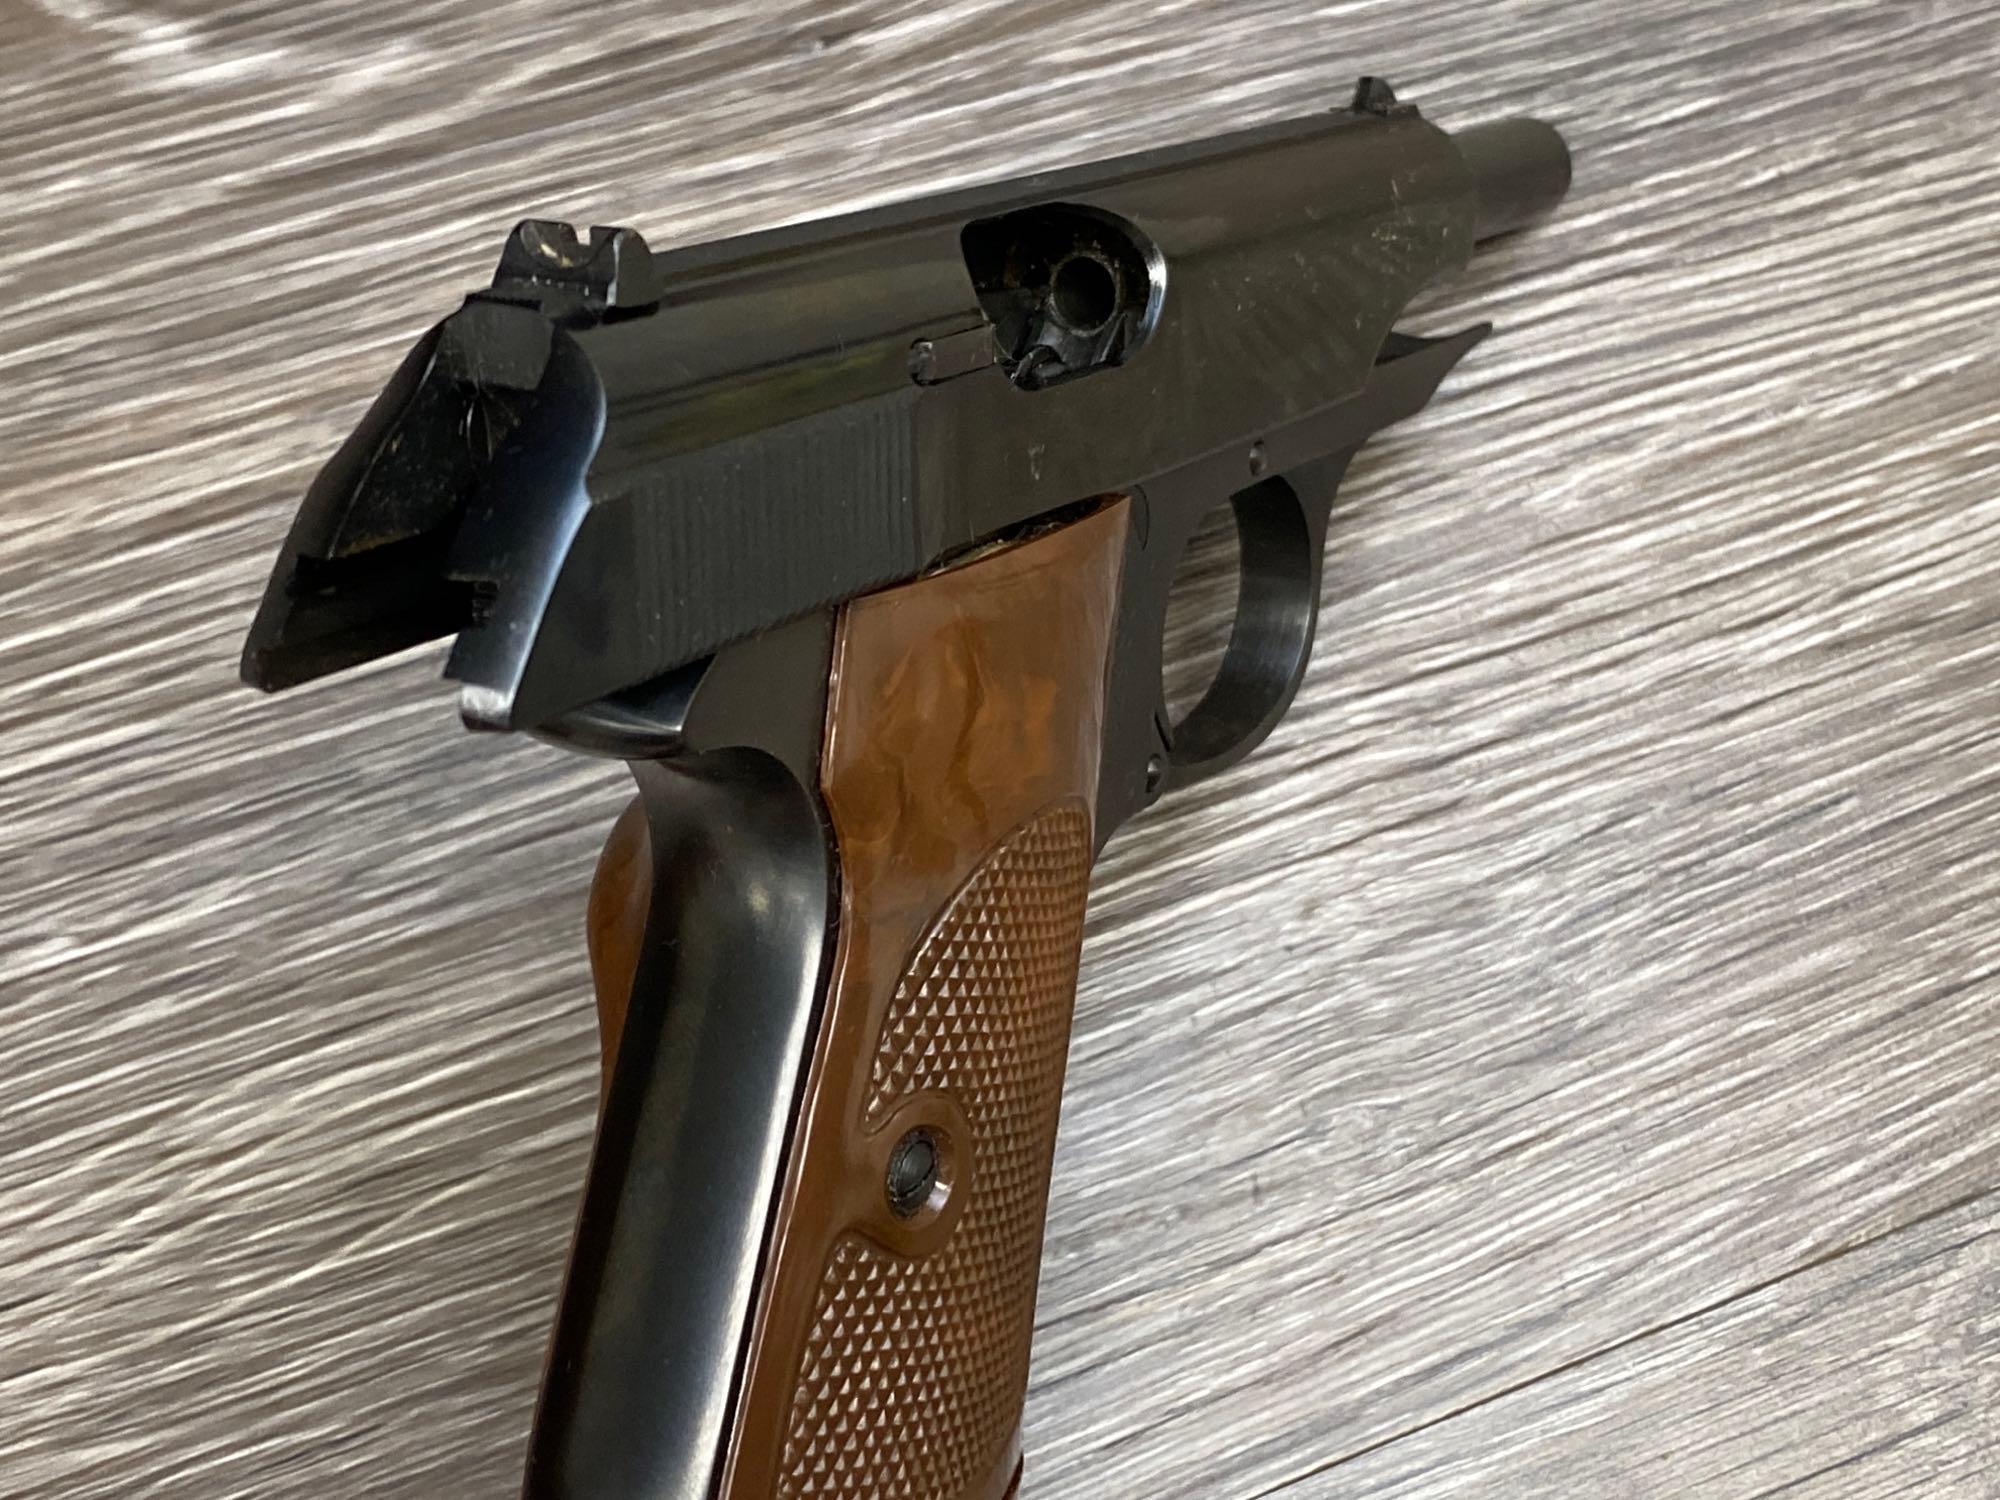 RARE MANURHIN WALTHER MODEL PP SEMI-AUTO .22 LR CAL WITH EXTENDED GRIP/MAGAZINE SWEDISH POLICE